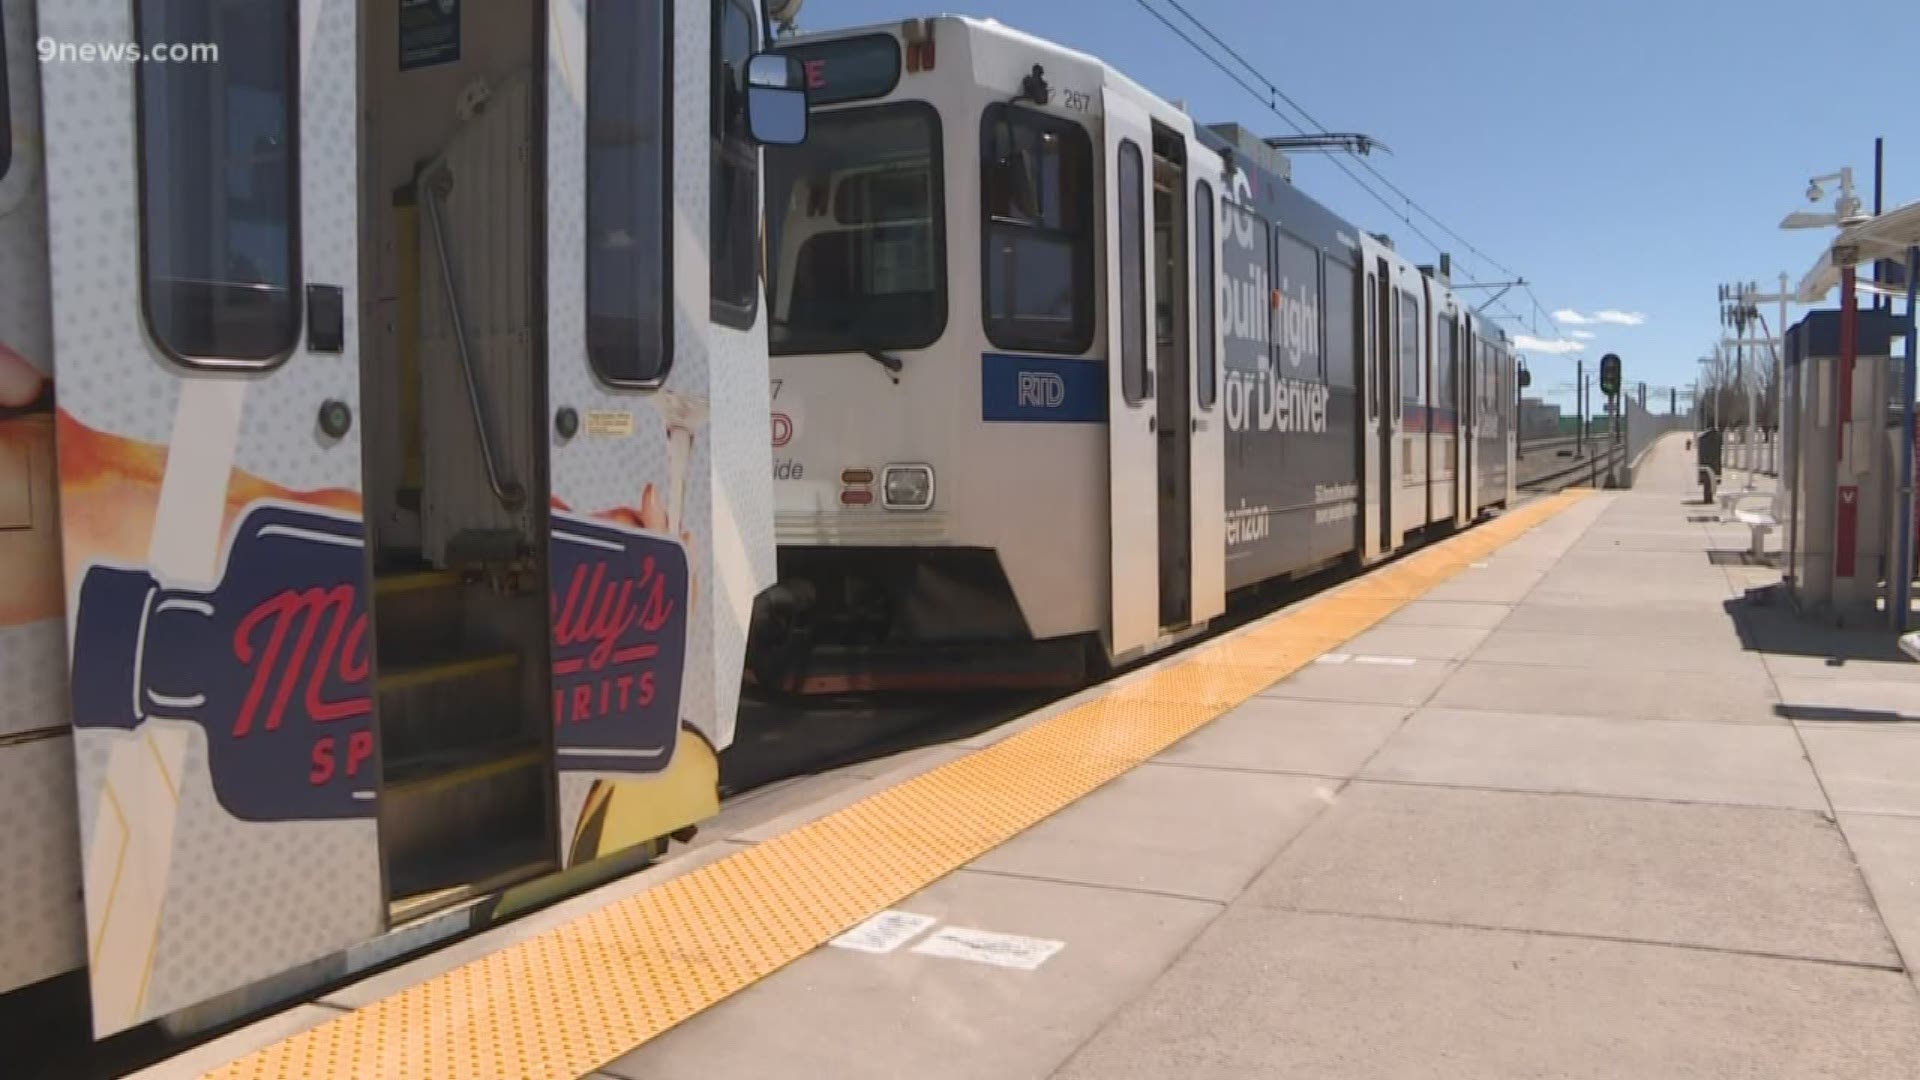 RTD’s elected board members Tuesday night approved changes that will reduce the agency’s bus, light rail and special services starting April 19.